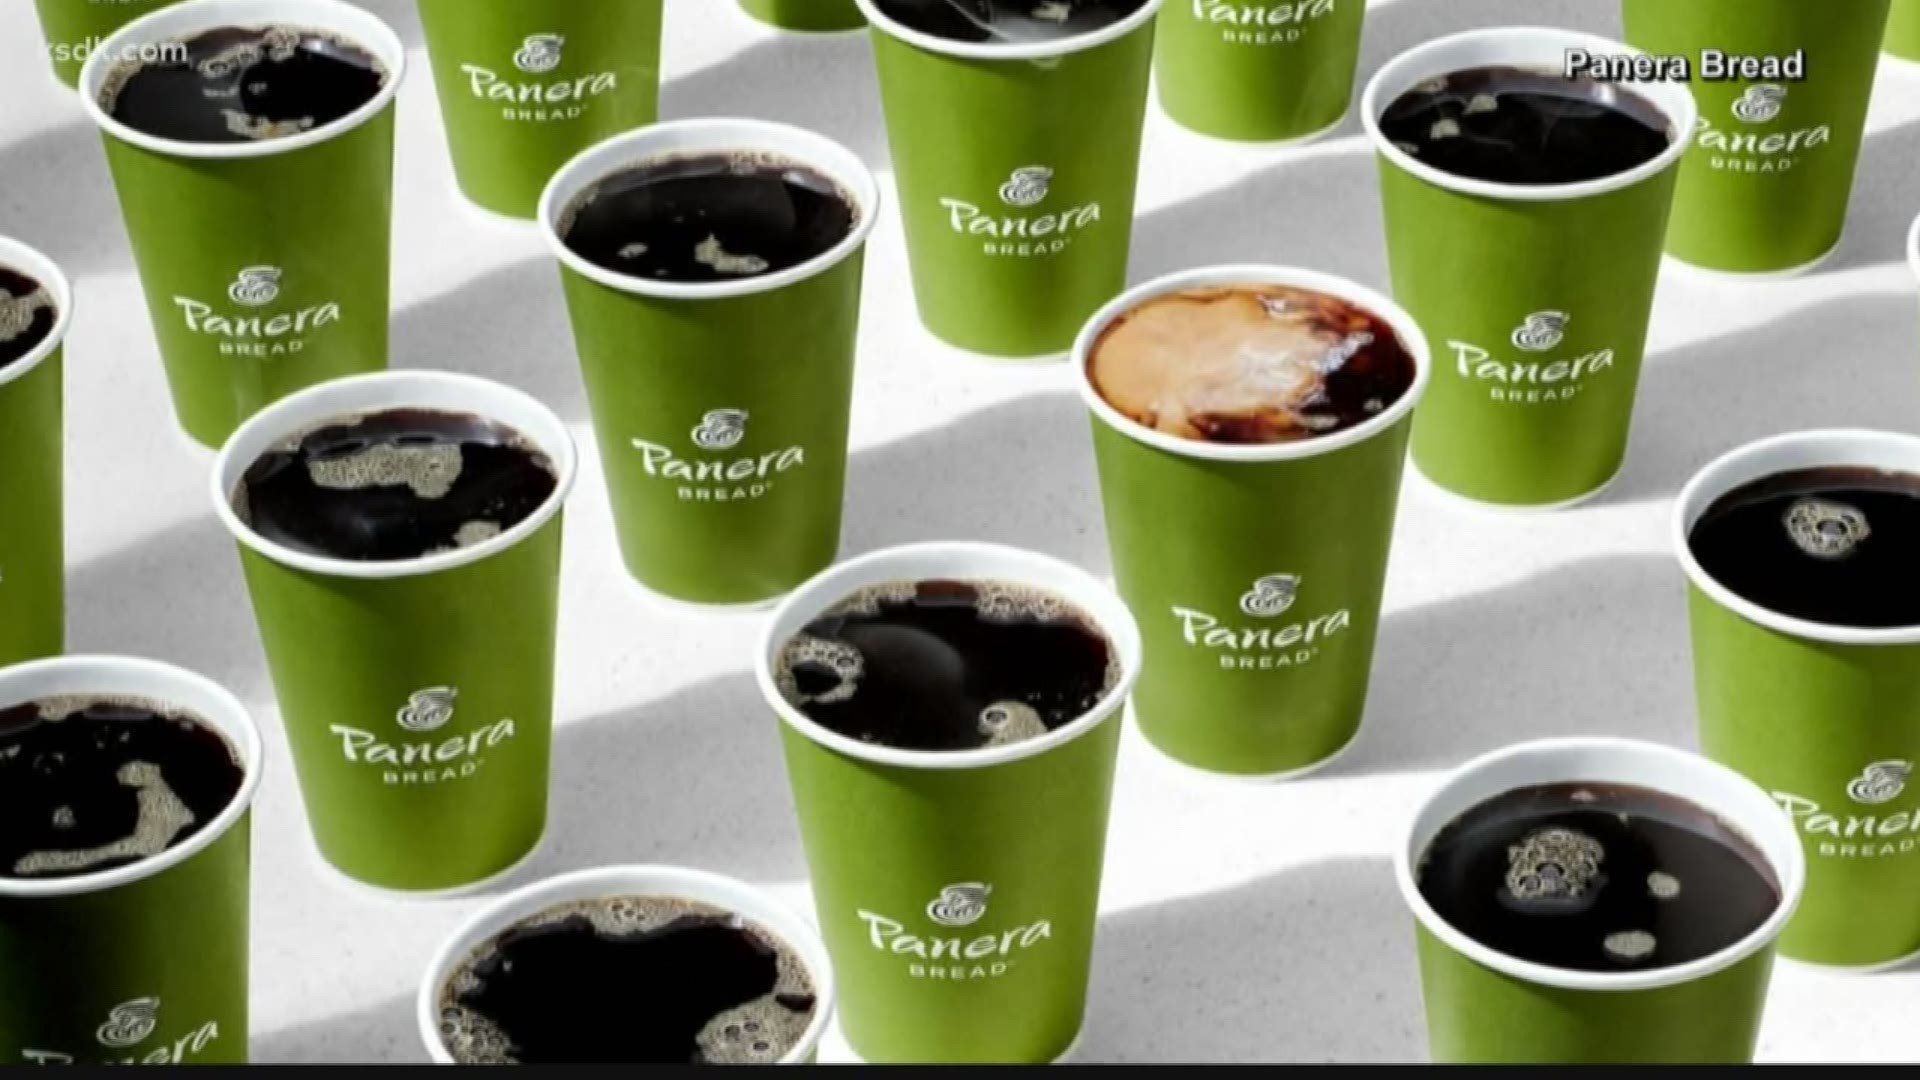 For just under 30 cents a day, you can get as much Panera coffee and tea as you want